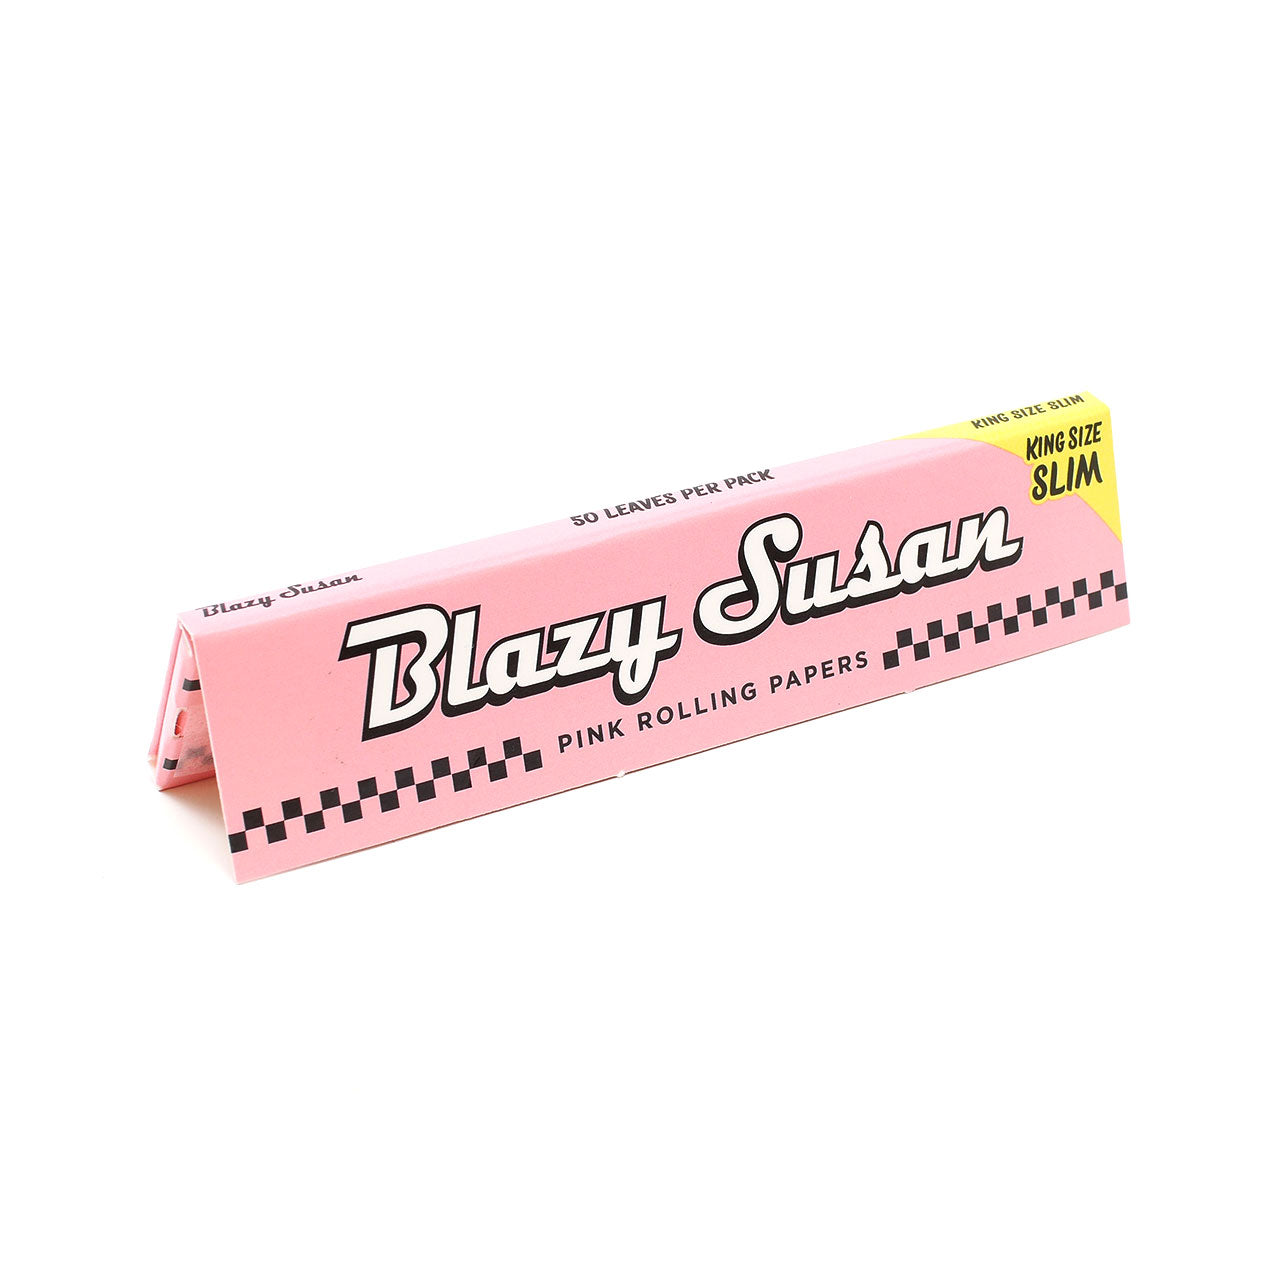 blazy susan pink rolling papers king size